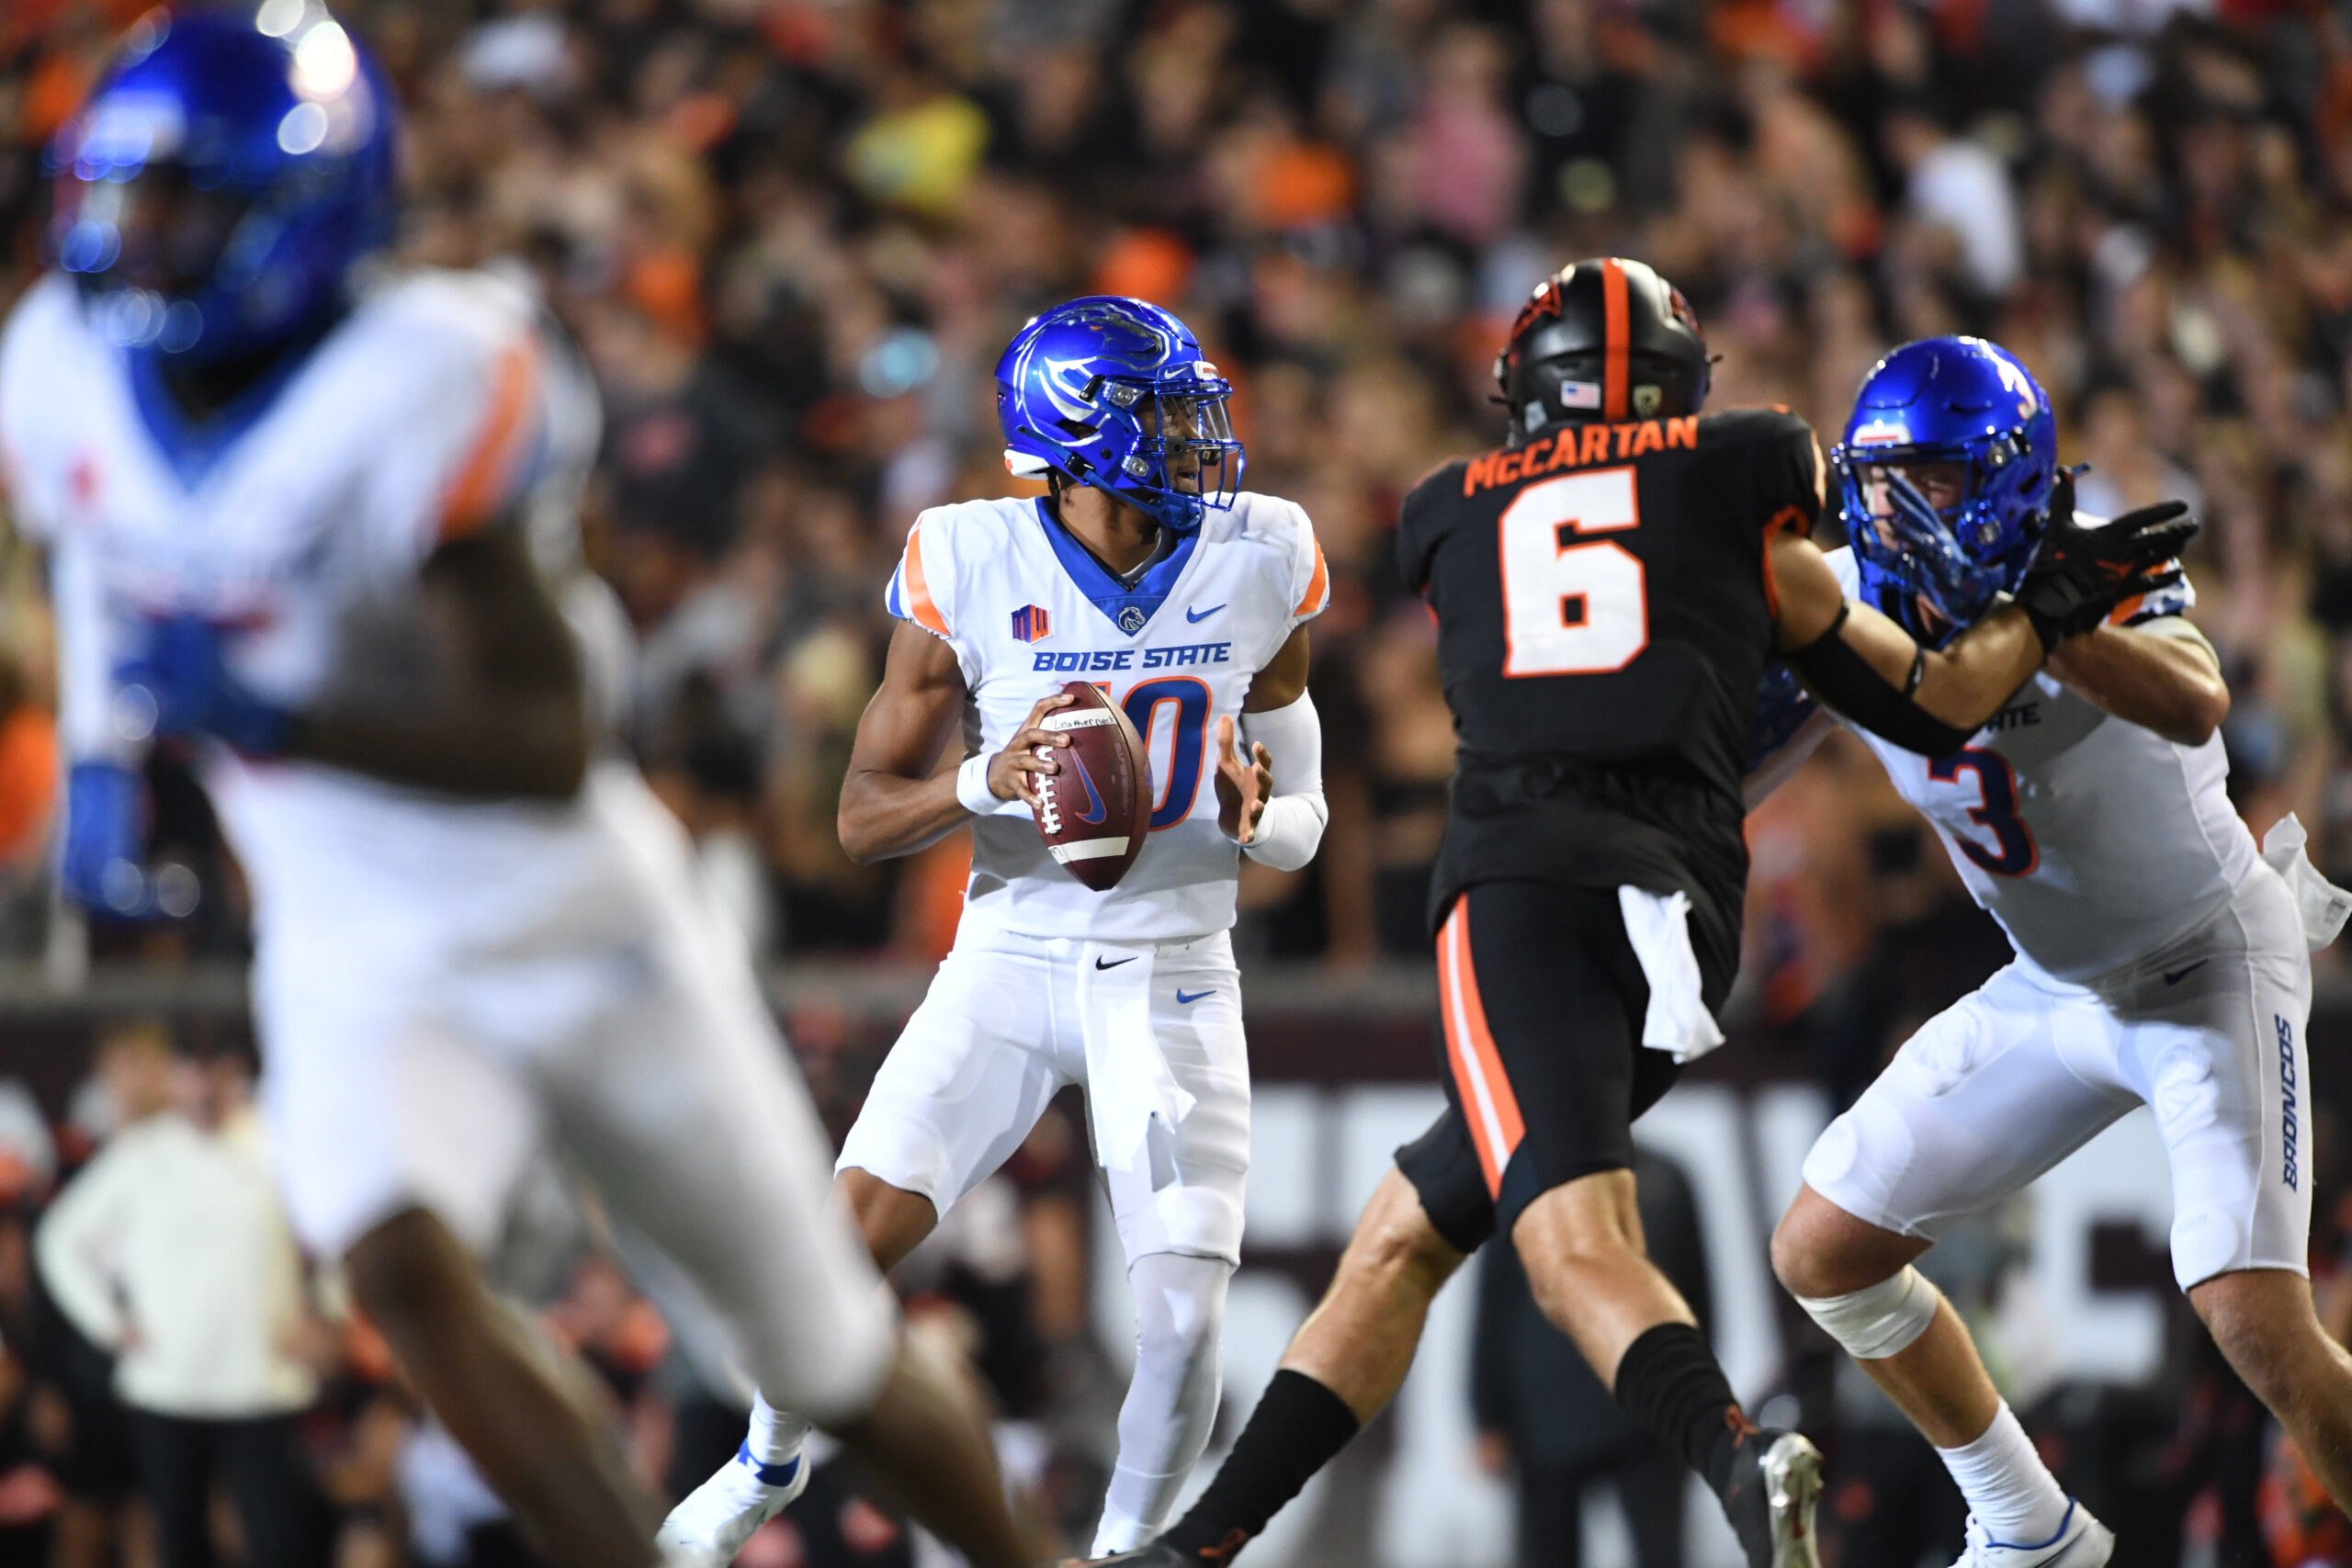 Bronco Breakdown: Players to watch, key stats and more for Boise